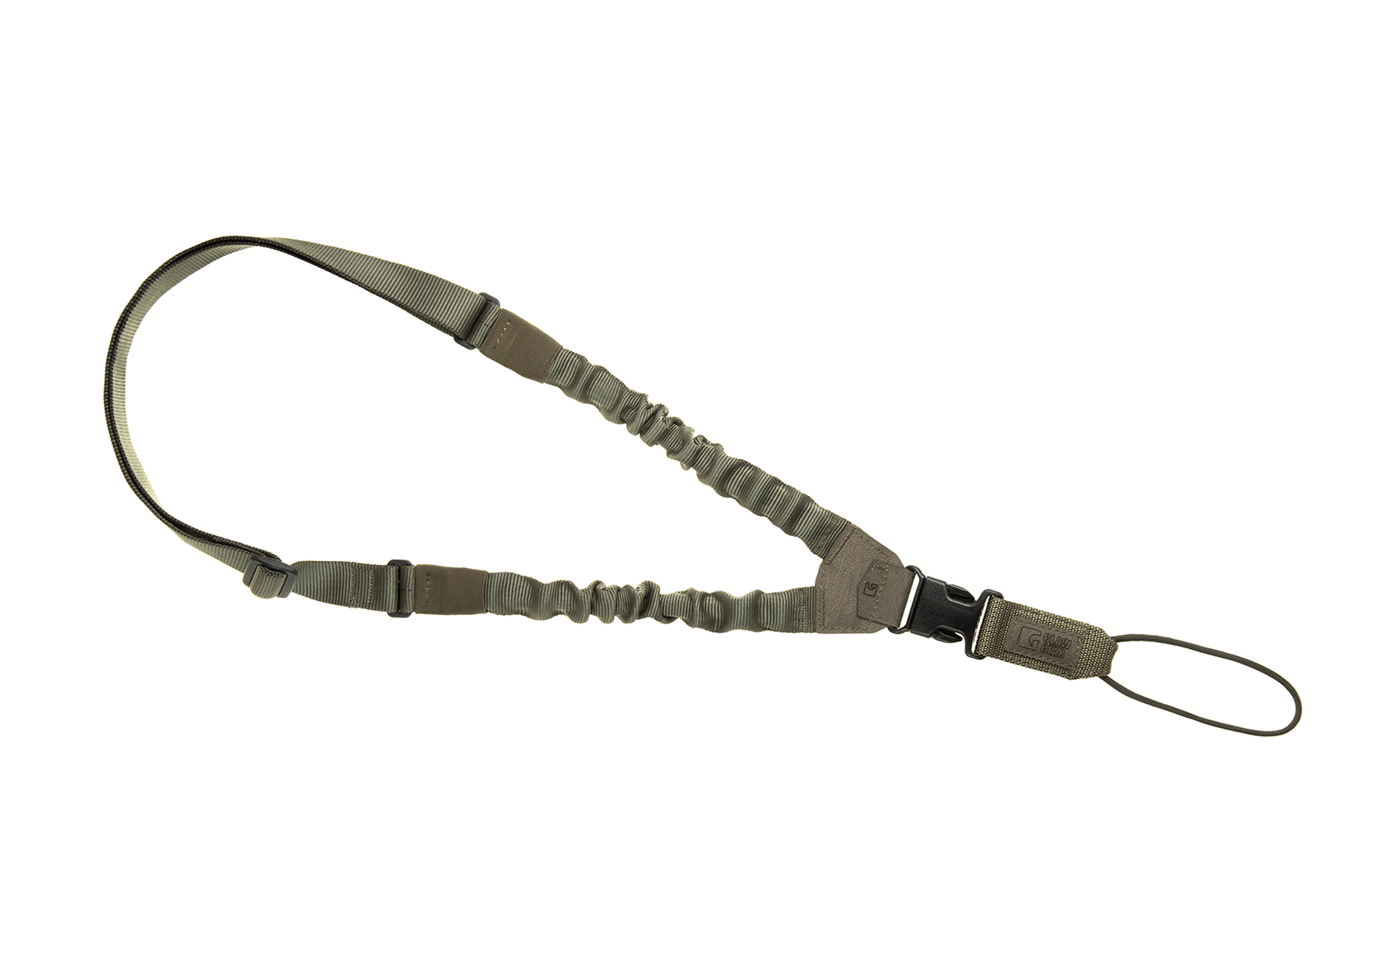 Clawgear one-point bungee sling, paracord end